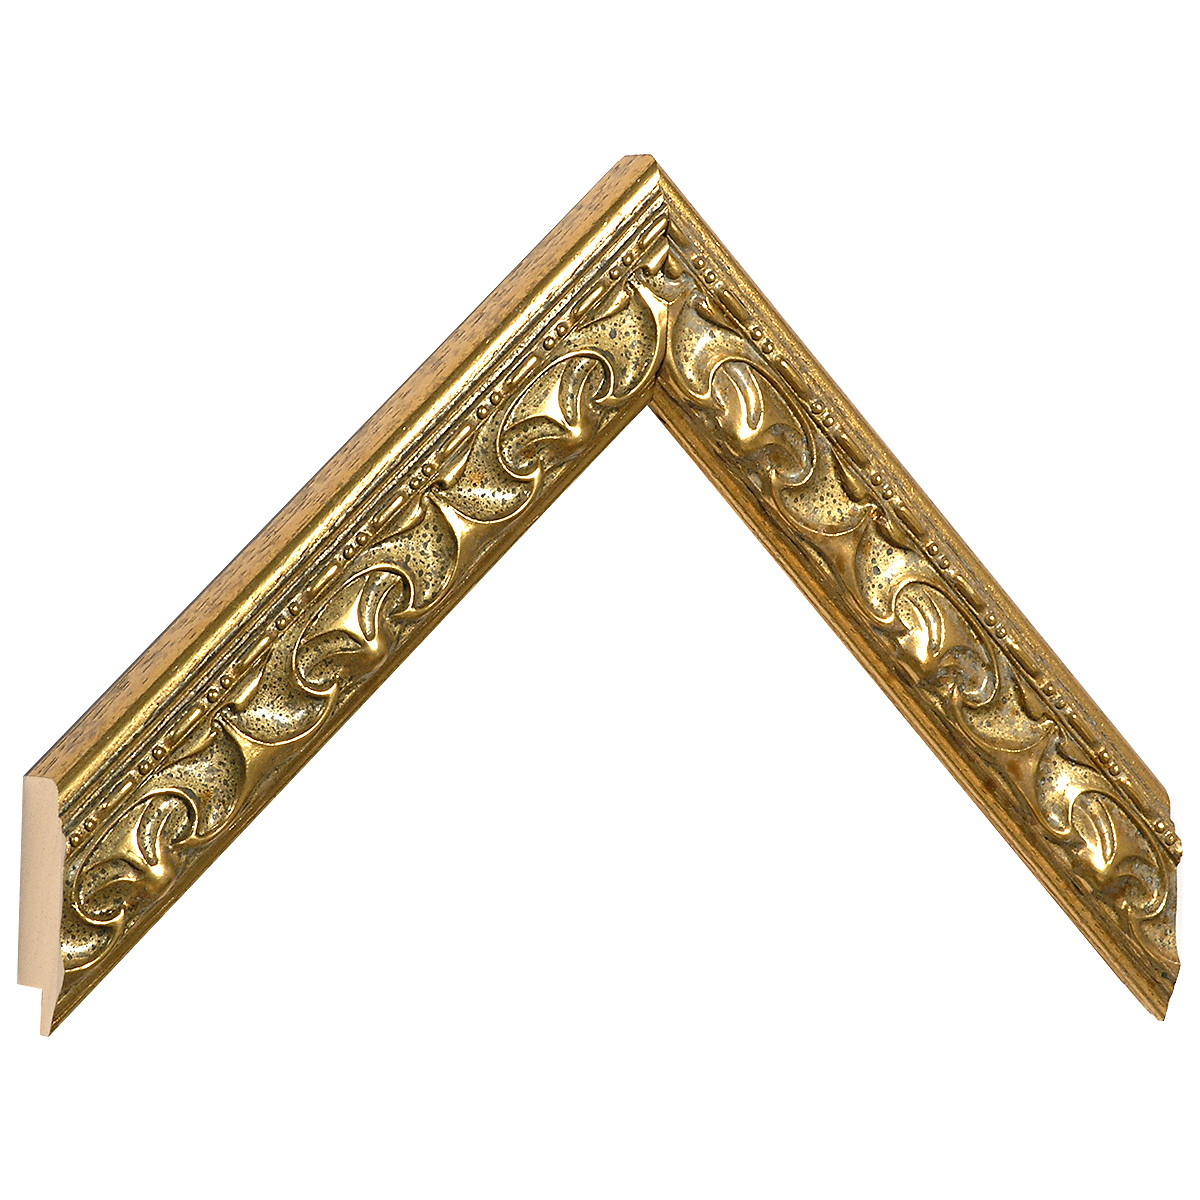 Moulding ayous gold with relief decorations - Sample